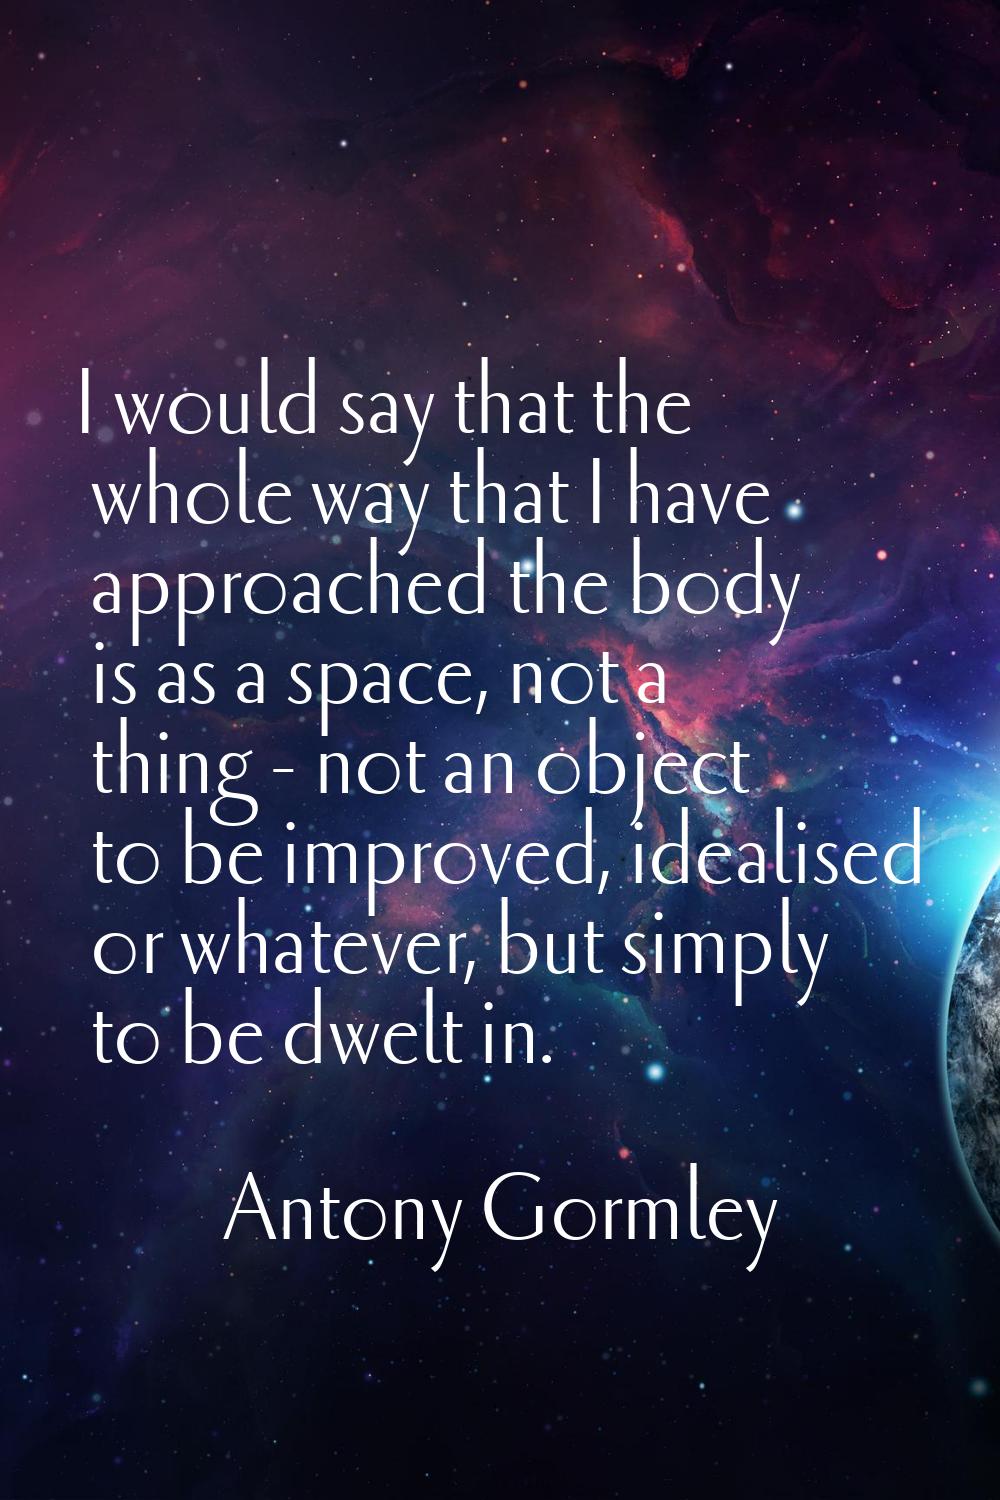 I would say that the whole way that I have approached the body is as a space, not a thing - not an 